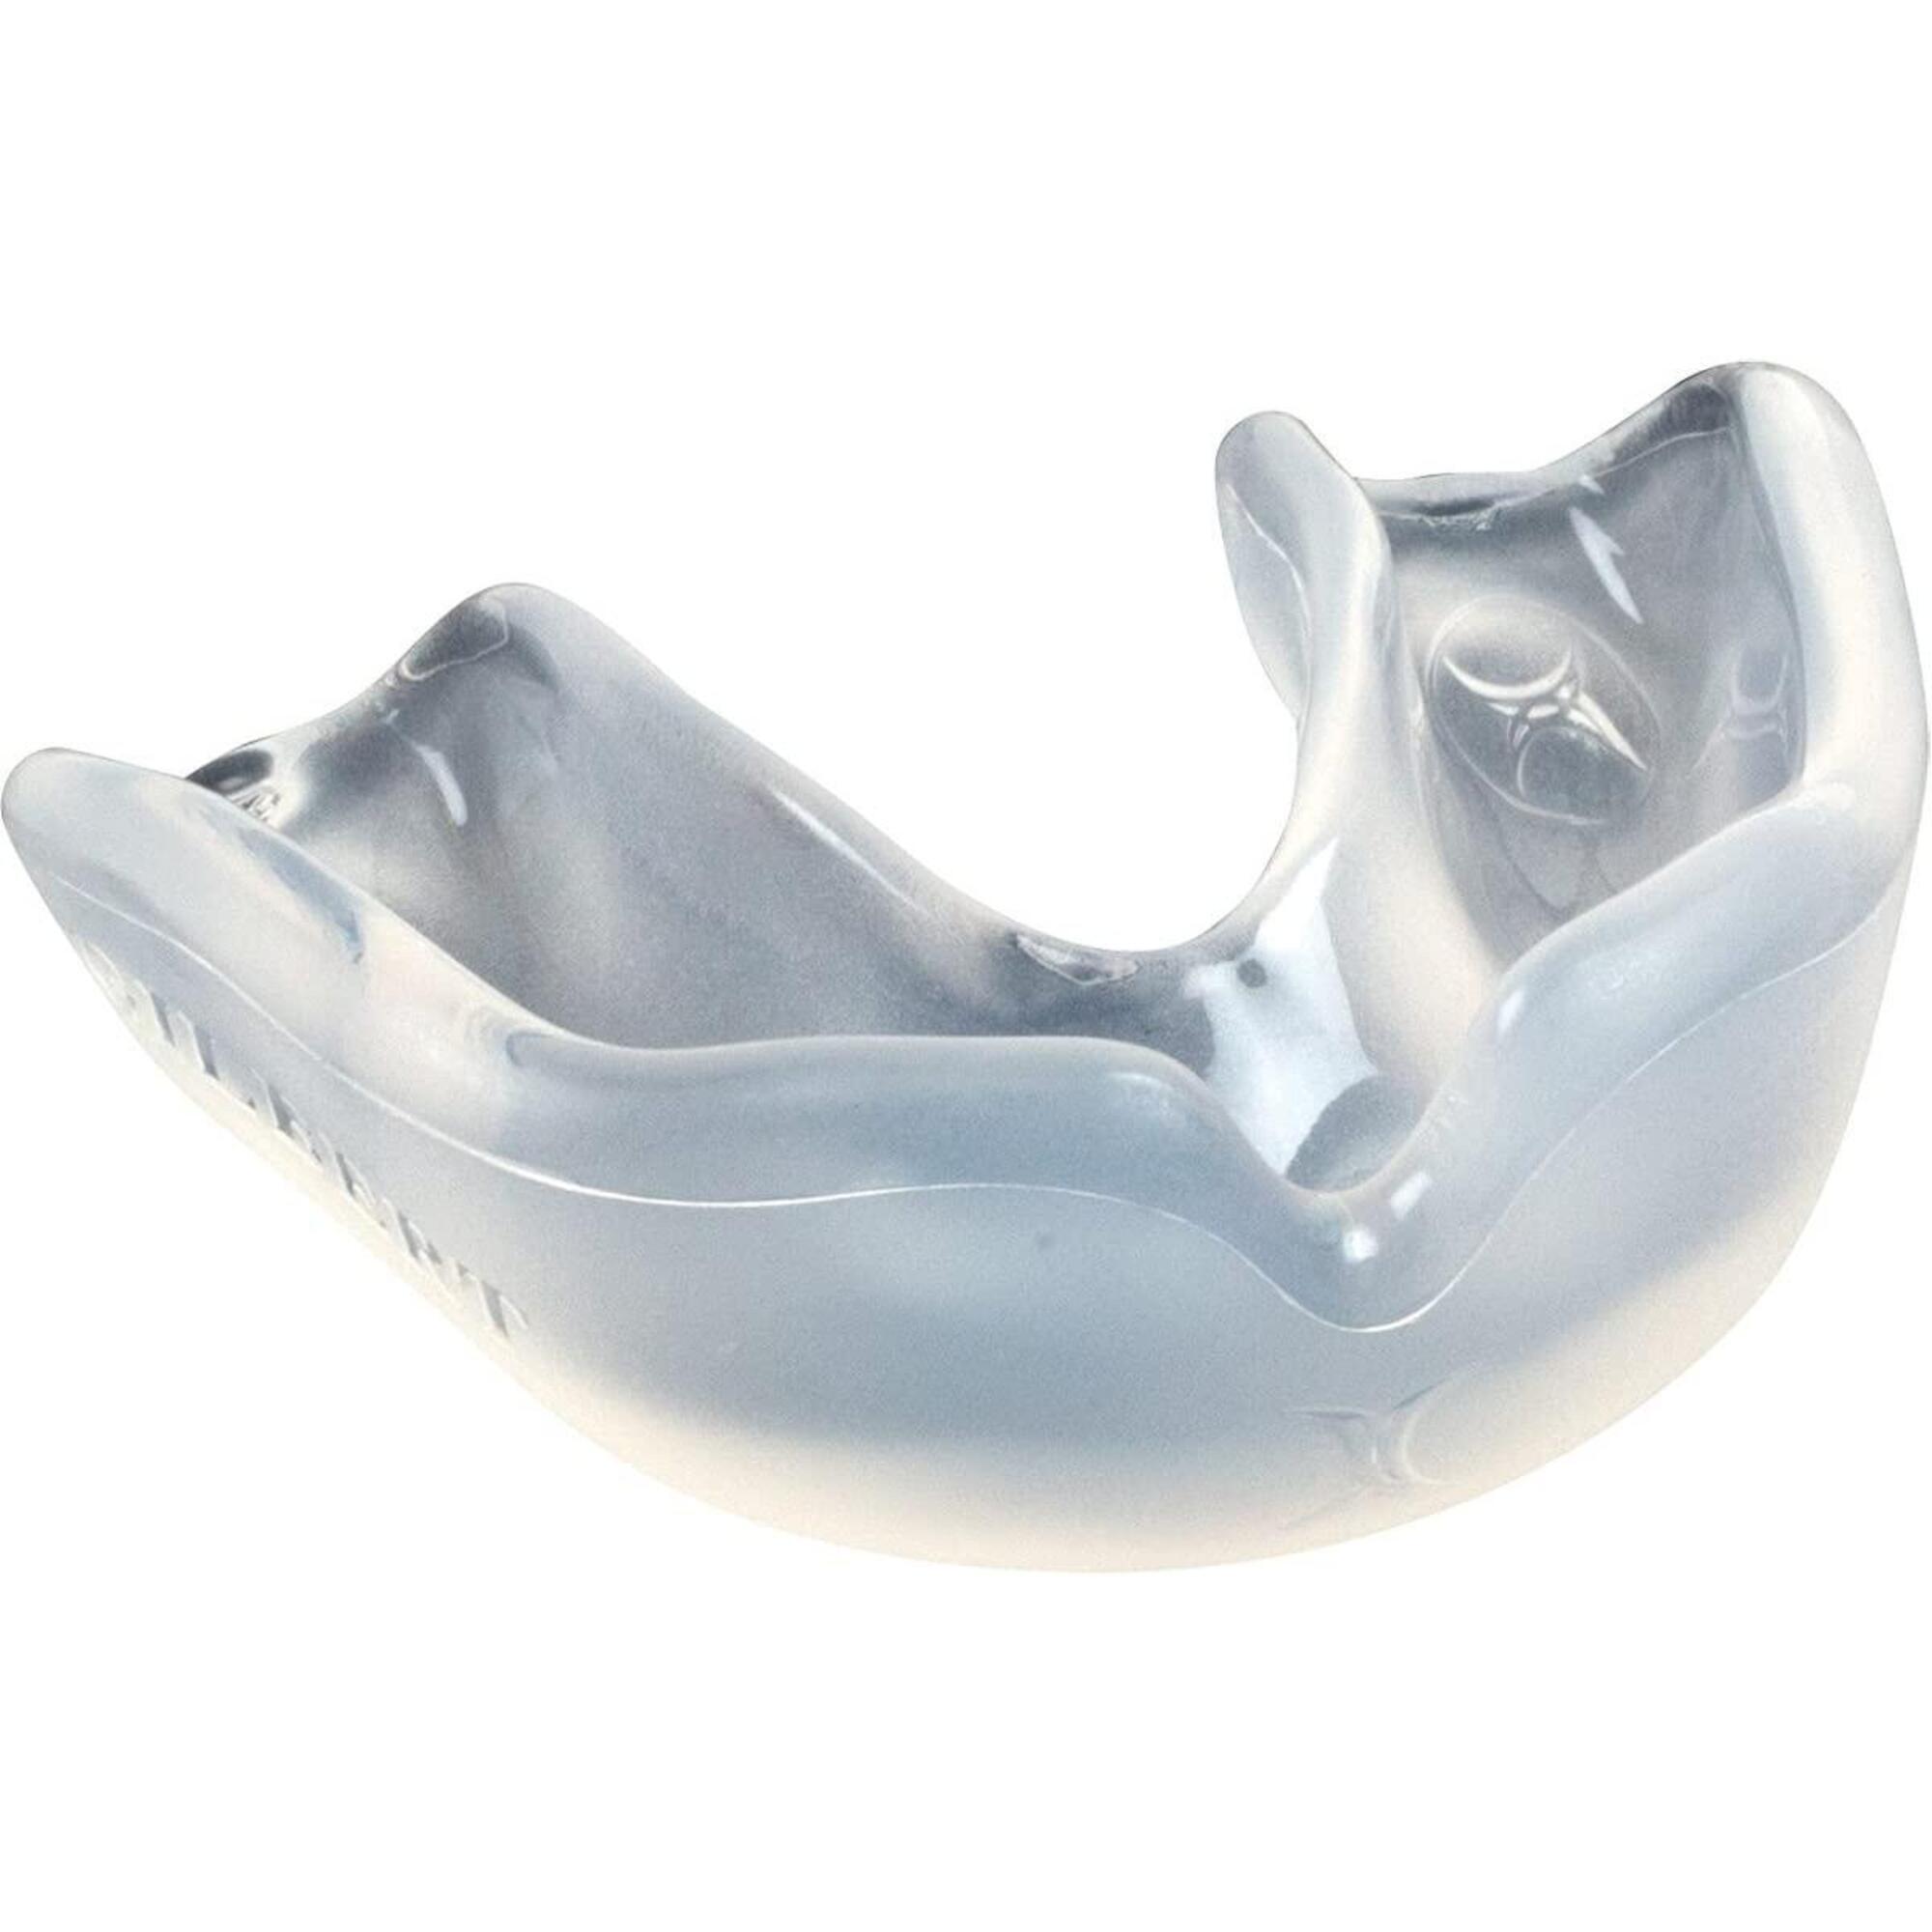 GILBERT Academy Mouthguard - Clear - Adult